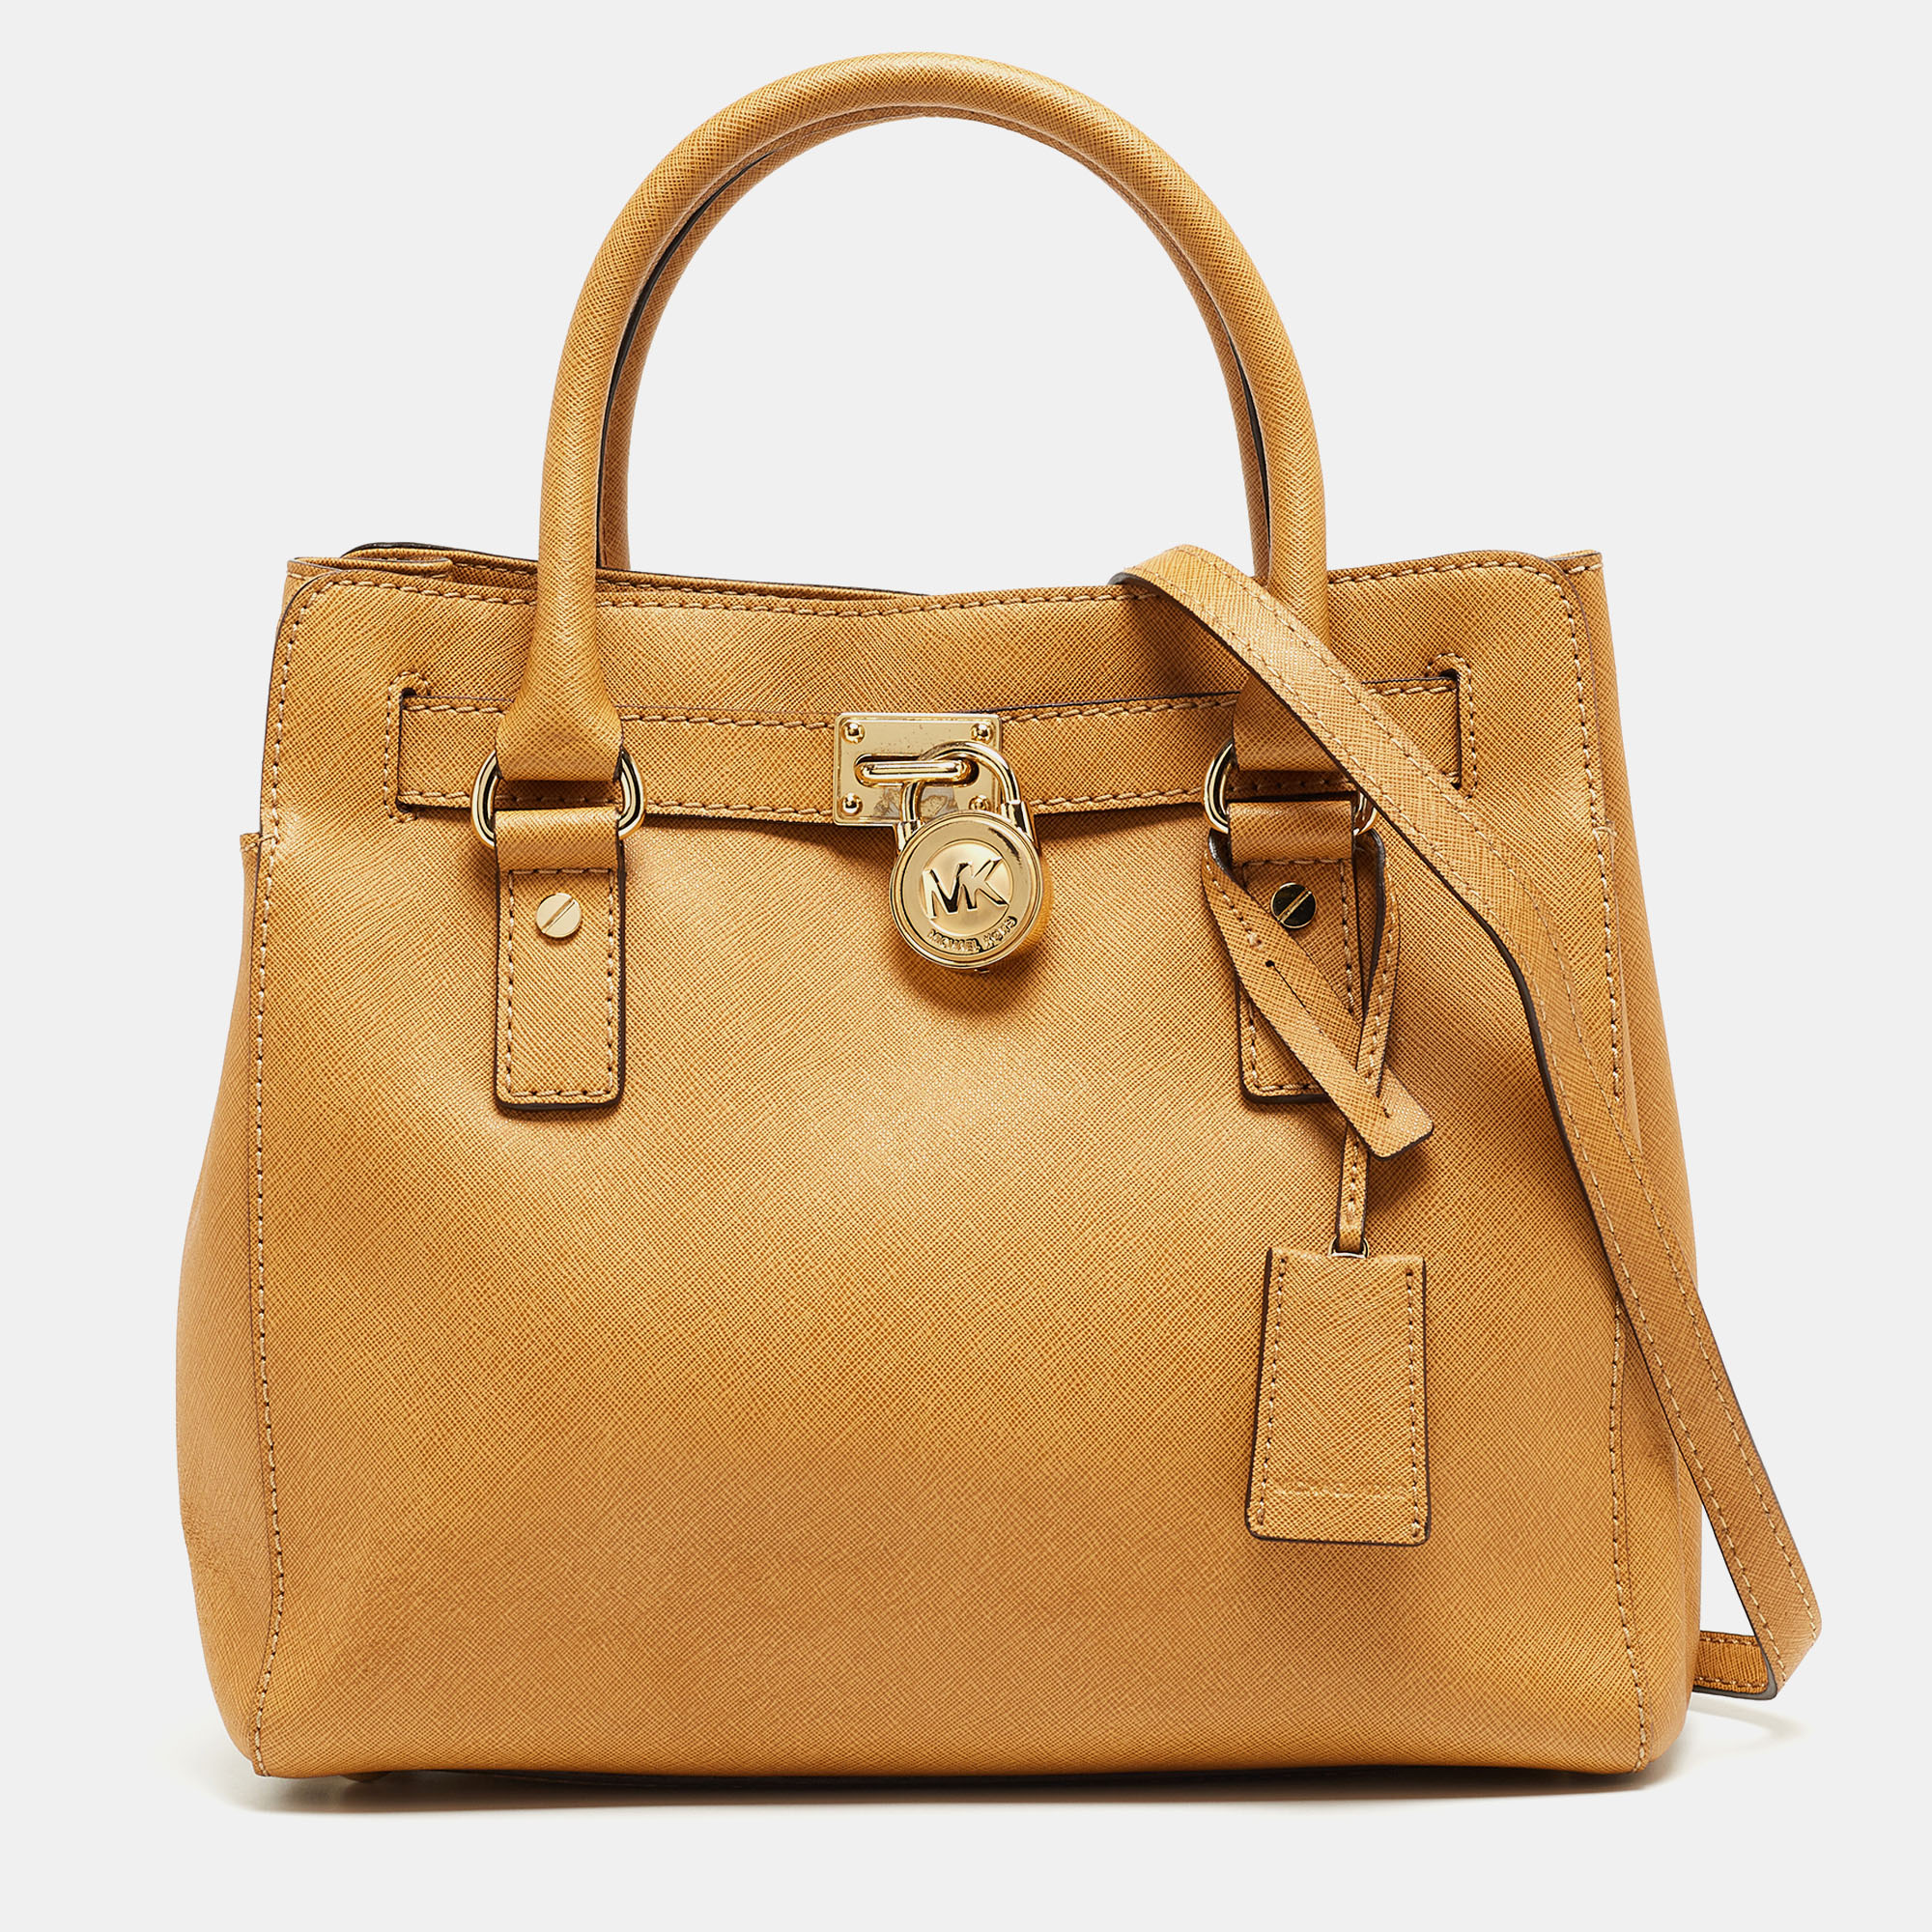 

Michael Kors Brown Leather Hamilton North South Tote